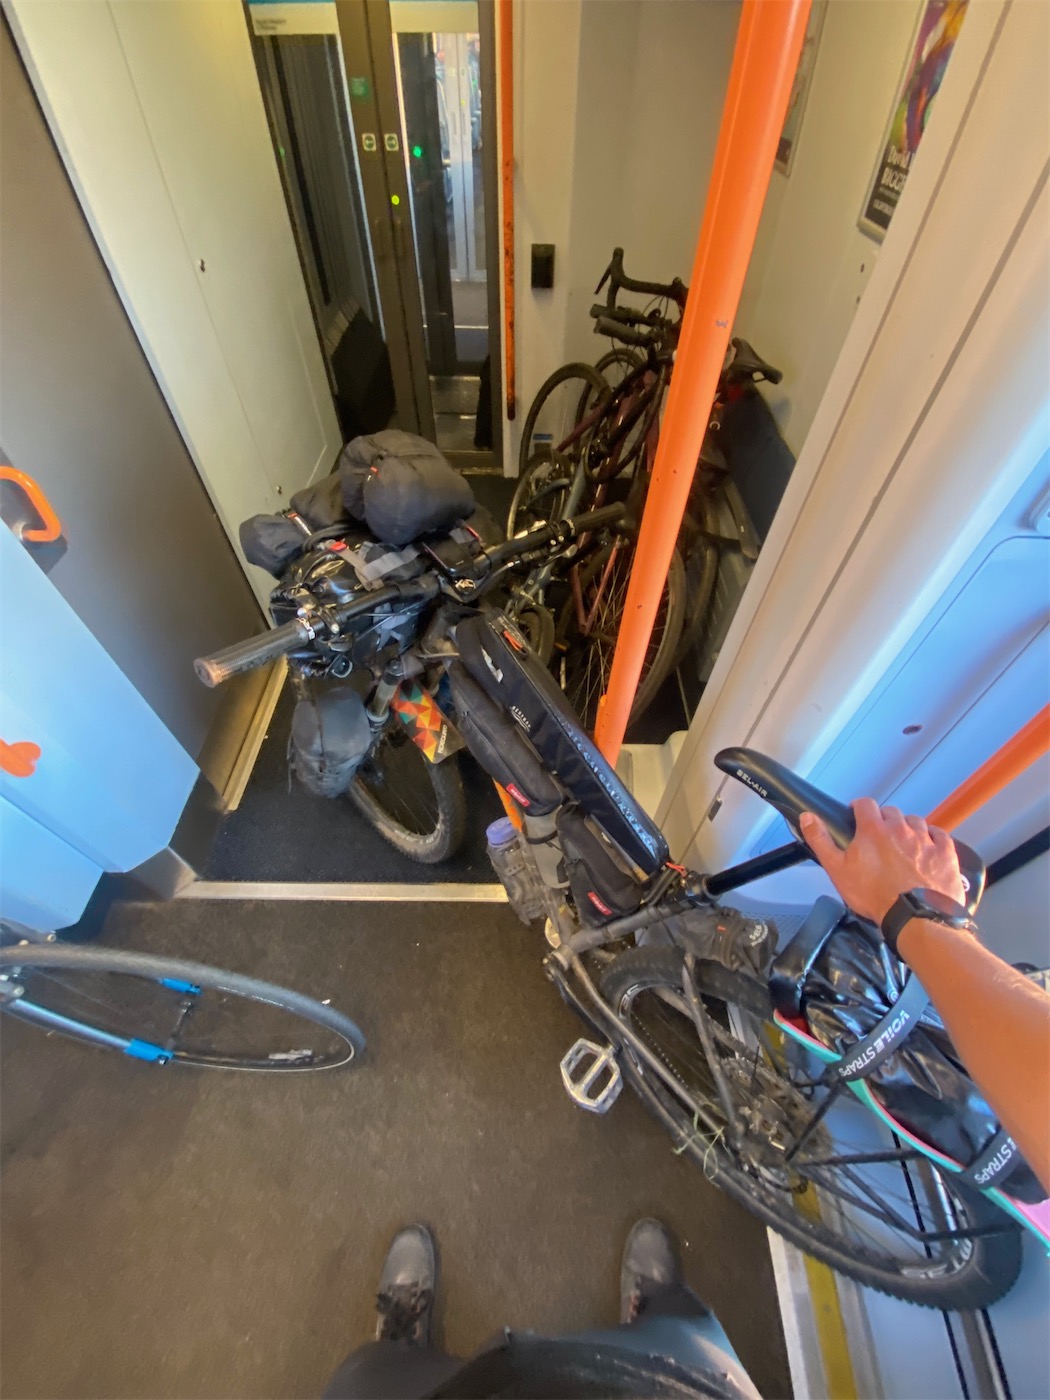 Indicative of nearly every train journey I've been on with a bike – could do better.